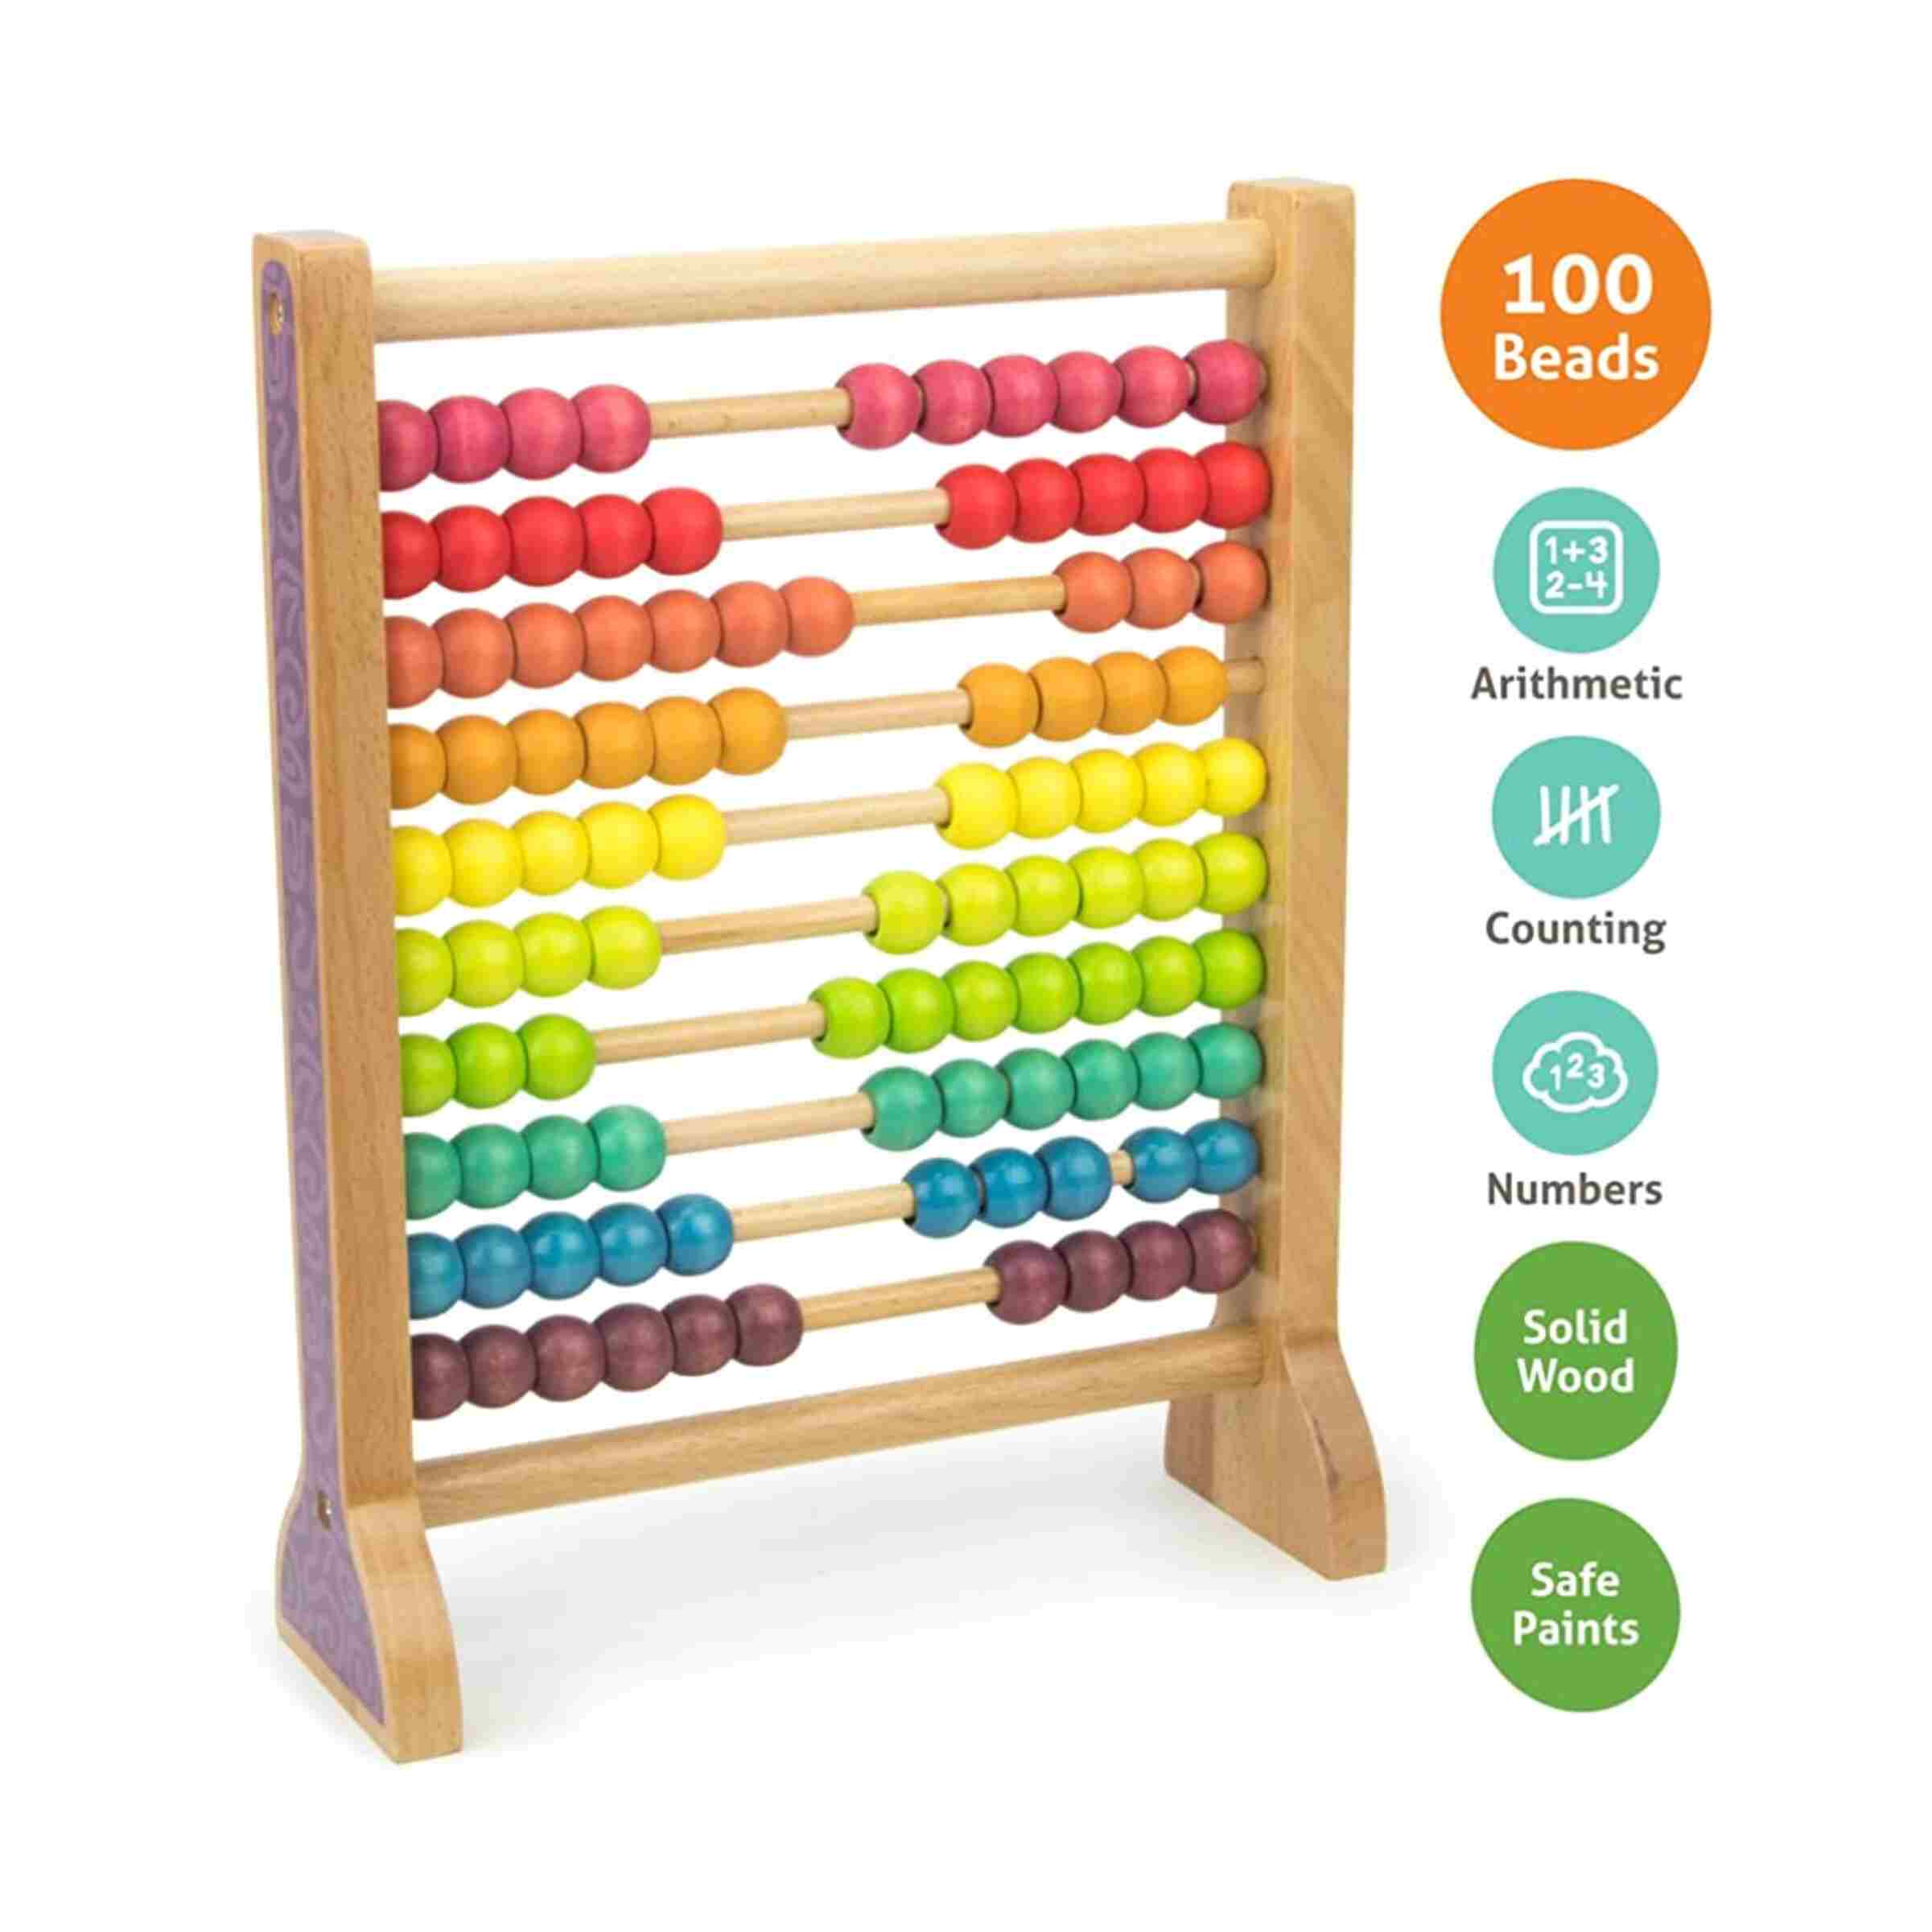 https://stationers.pk/cdn/shop/files/WoodenEducationalAbacusCounting100Beads.jpg?v=1691138768&width=2401